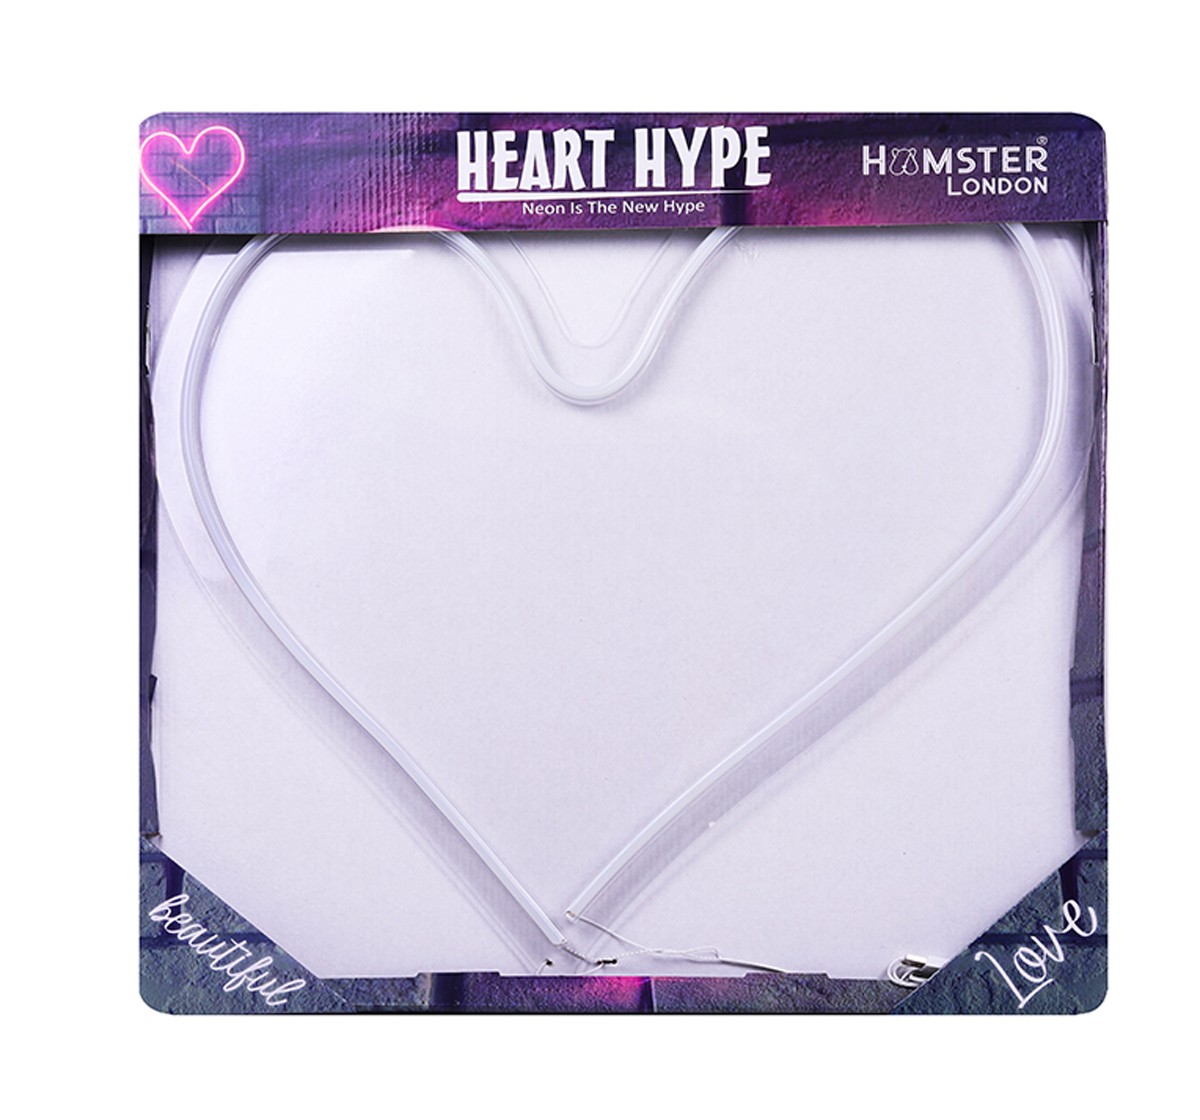 Hype Heart Shaped Neon LED Light by Hamster London, Pink, 10Y+